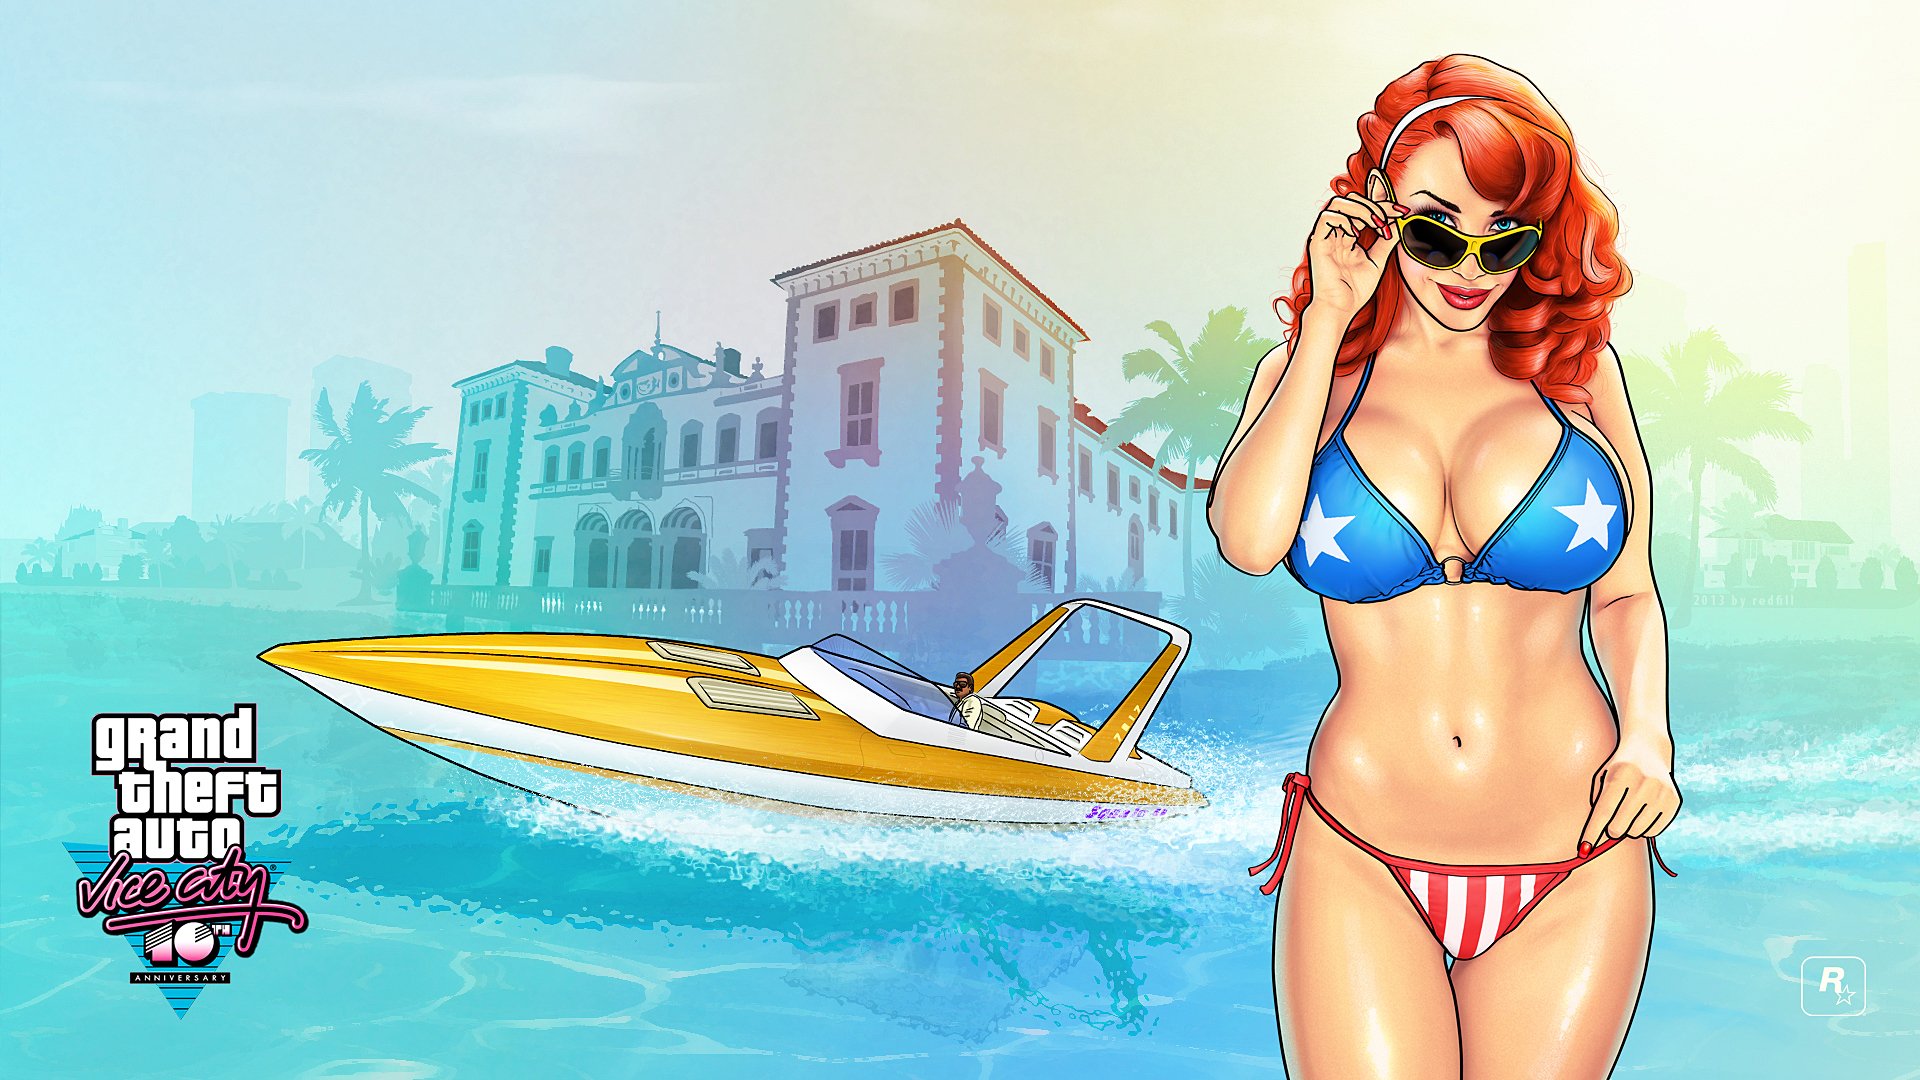 candy, Suxxx, Gta, Vice, City, Vc, Grand, Theft, Auto, Game, Video Wallpaper